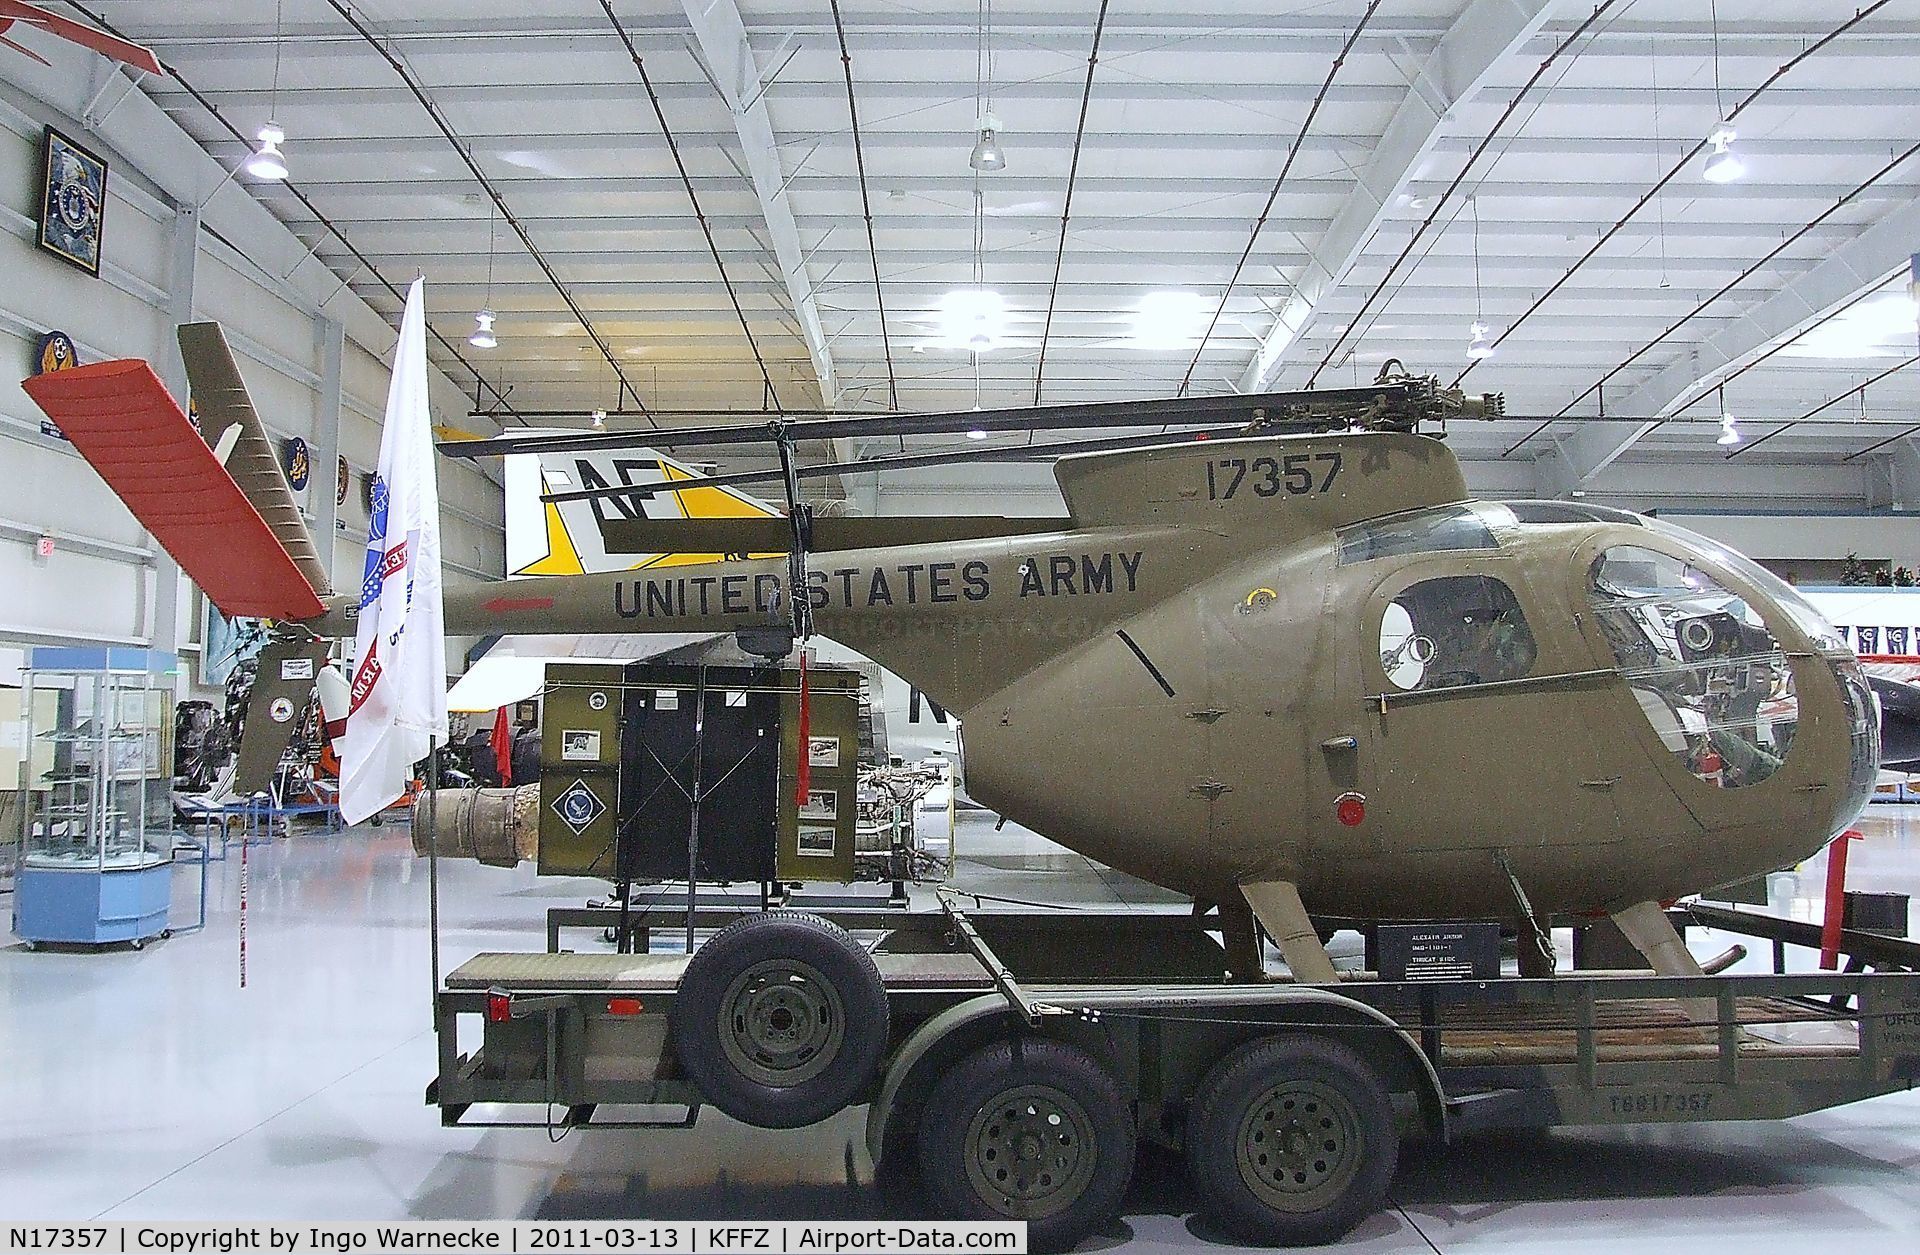 N17357, Hughes OH-6A Cayuse C/N 1317, Hughes OH-6A Cayuse at the CAF Arizona Wing Museum, Mesa AZ